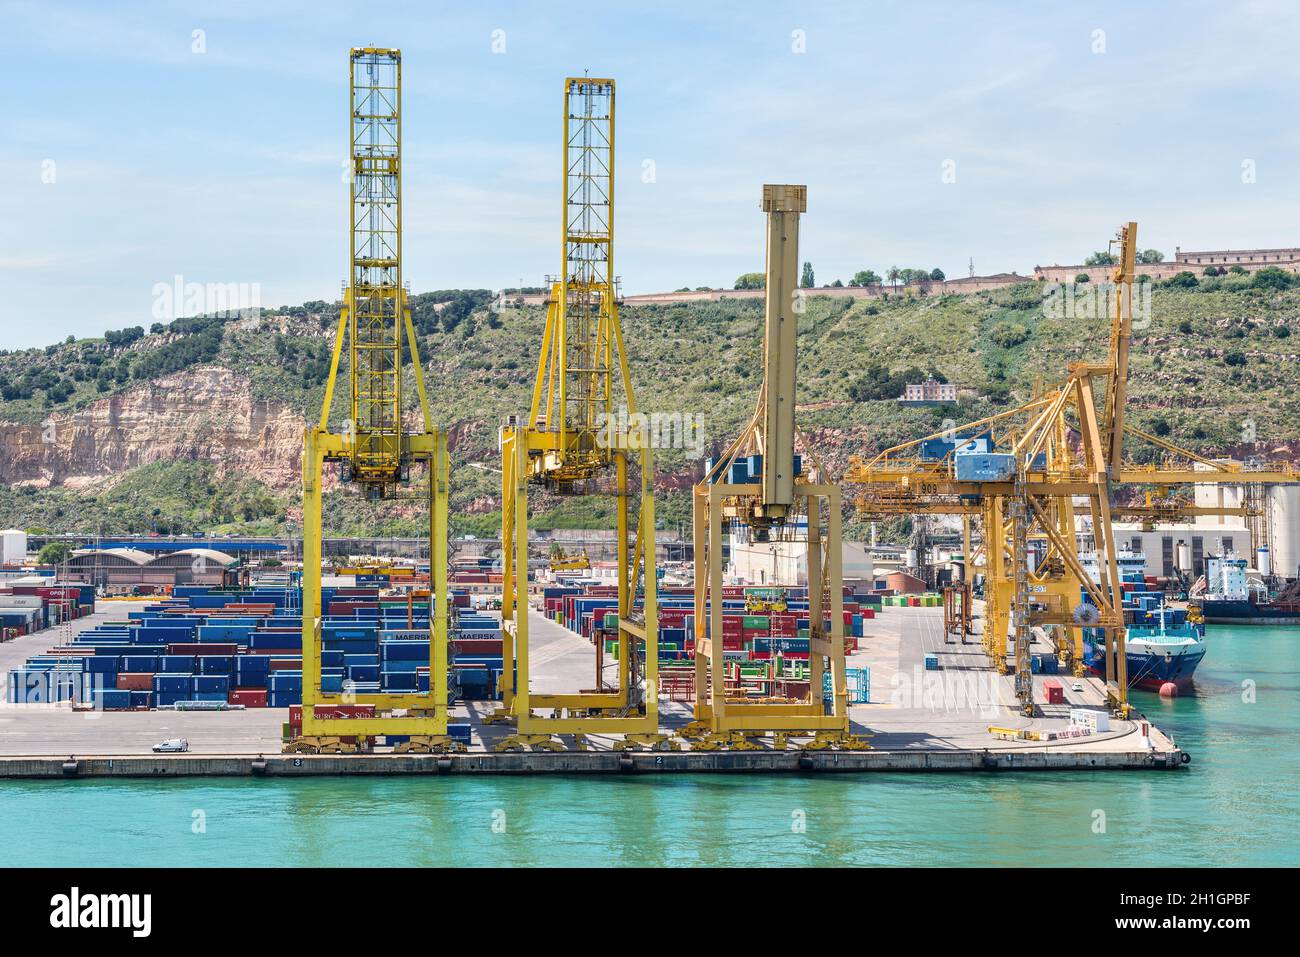 Barselona, Spain - May 16, 2017: View of the commercial port of Barcelona, Catalonia, Spain. It is Spain's third and Europe's ninth largest container Stock Photo